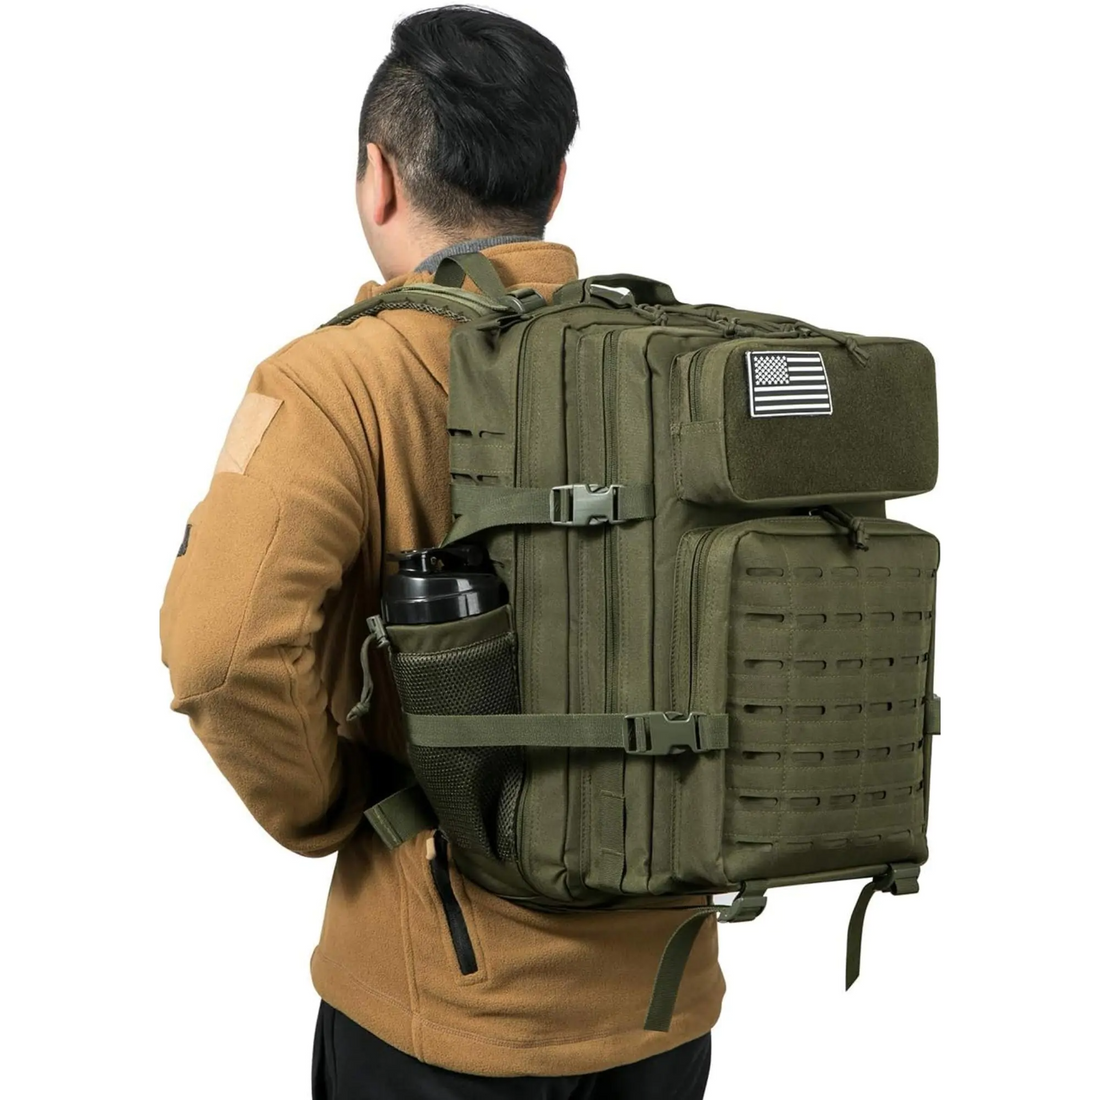 Large Military Tactical Backpack